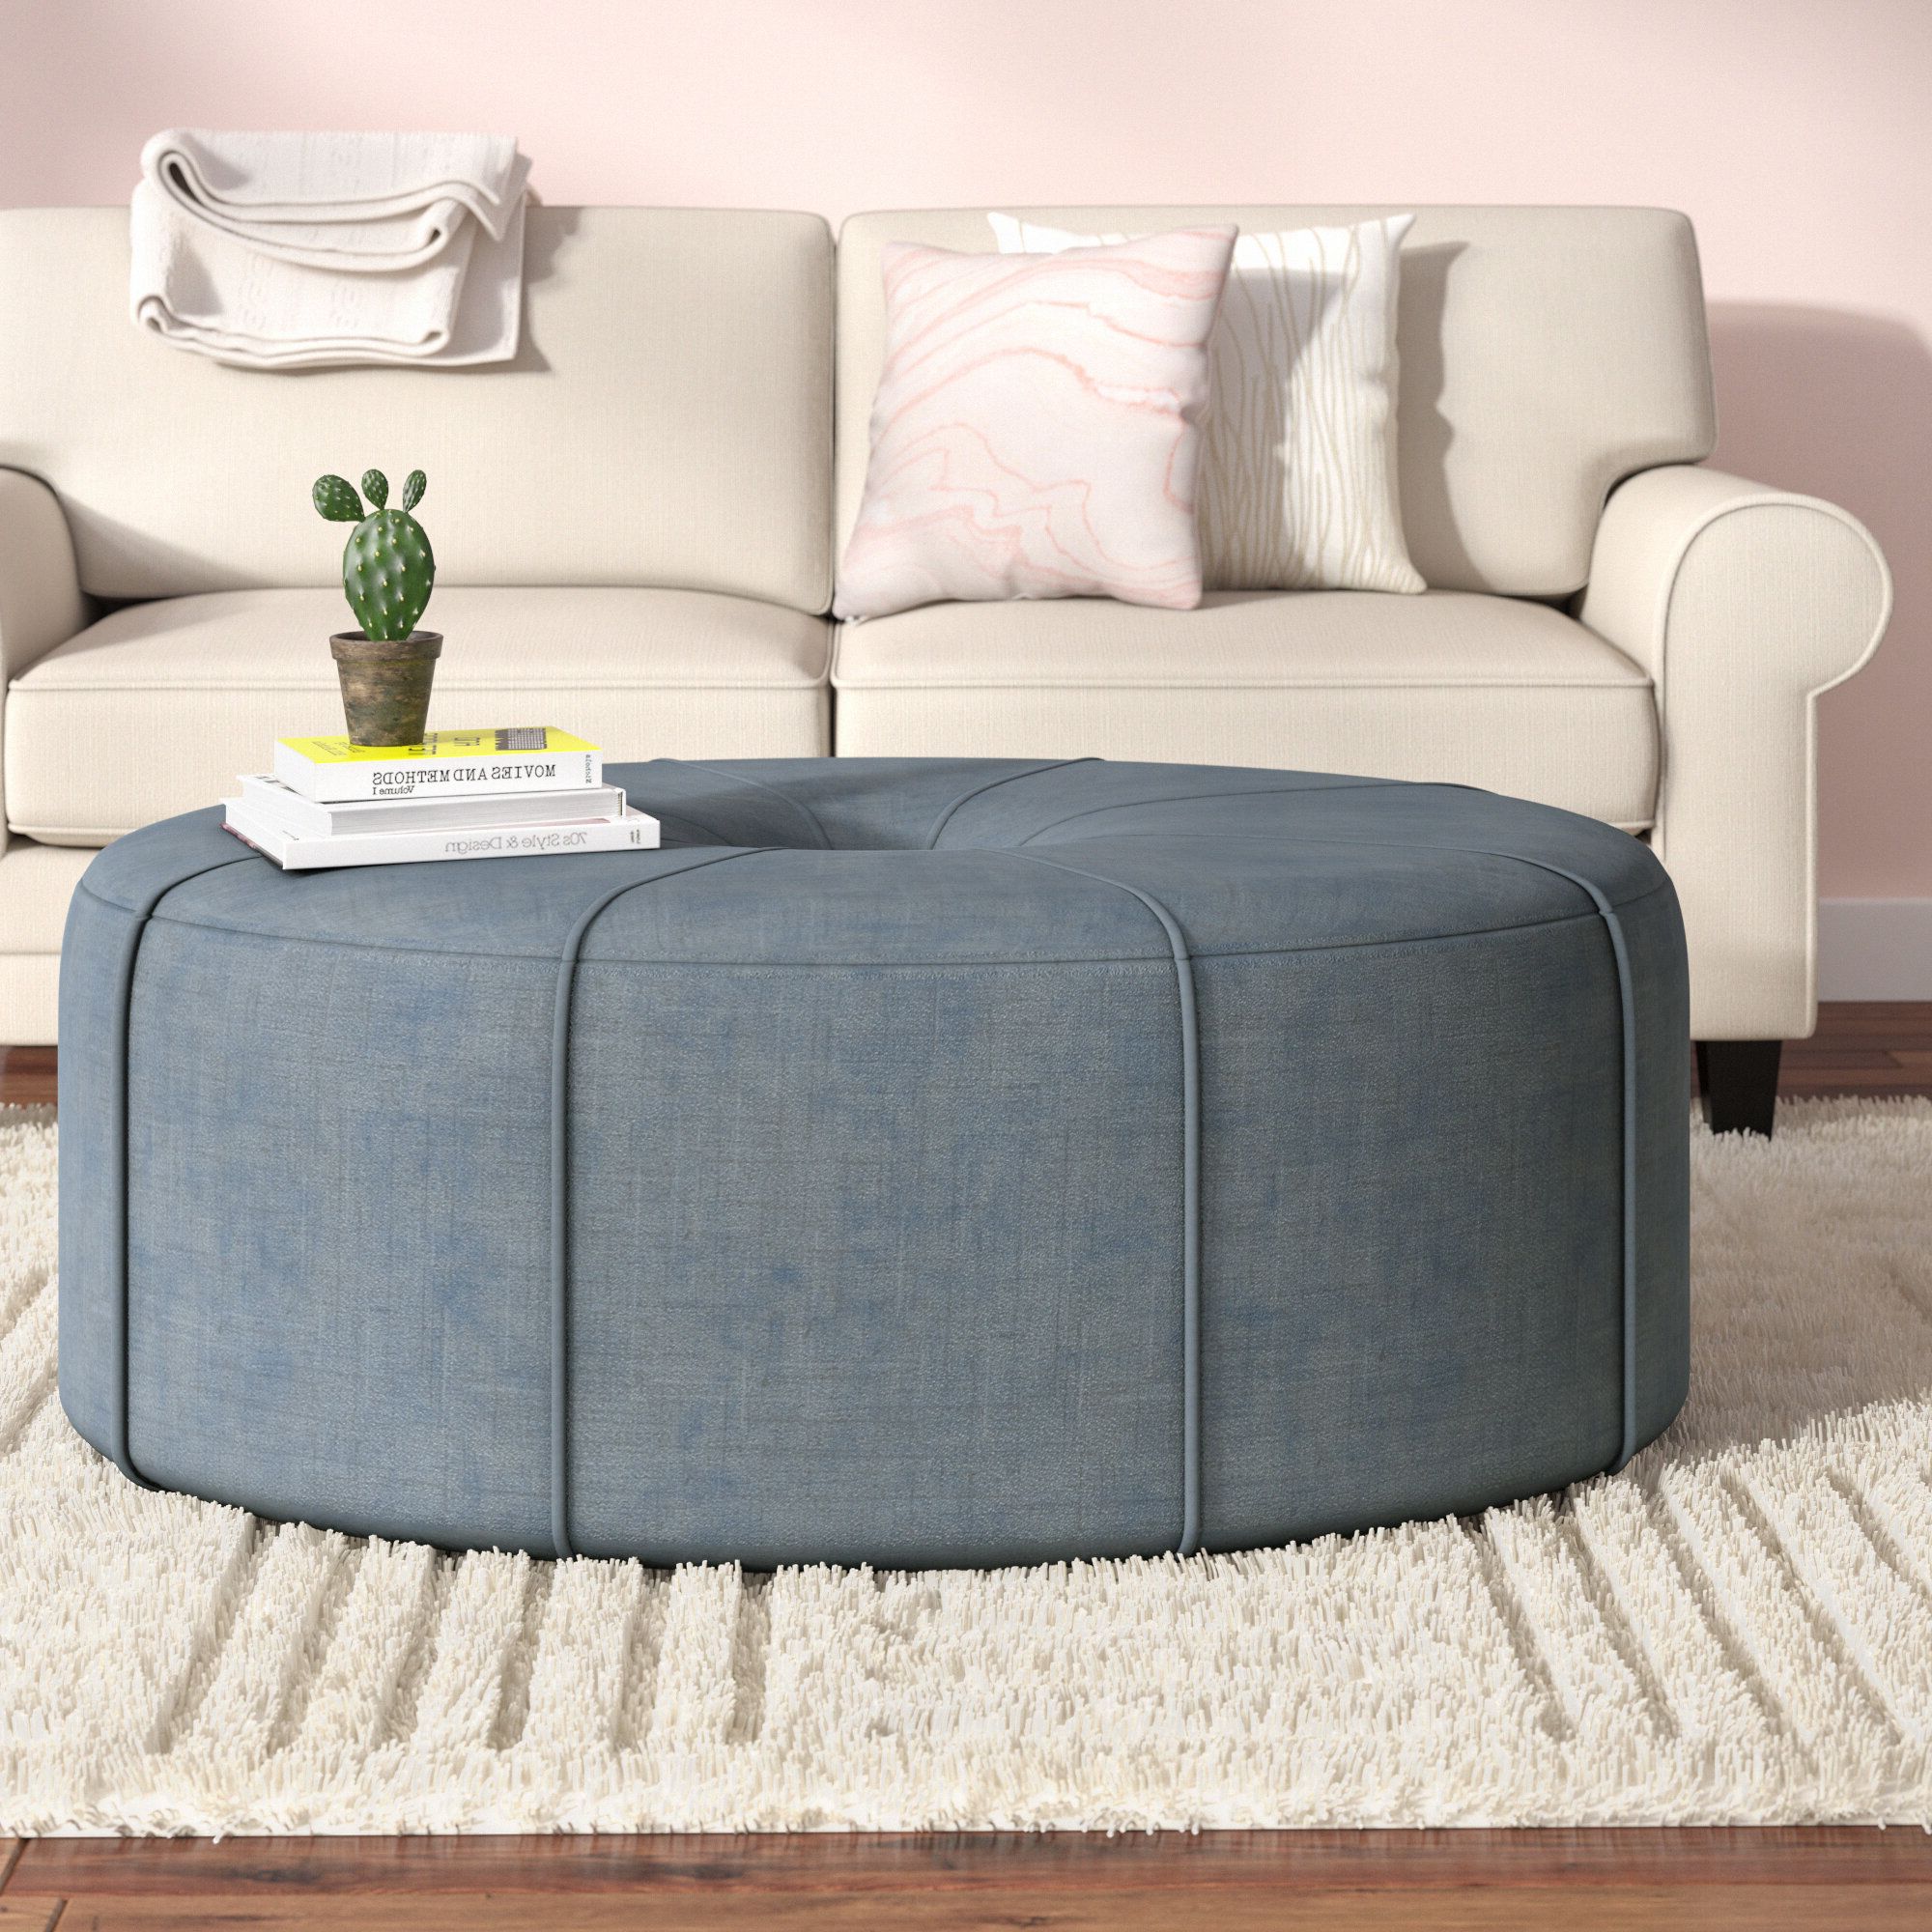 Oval Tufted Ottoman Coffee Table : Round Grey Fabric Tufted Coffee Regarding Well Known Gray Fabric Oval Ottomans (View 7 of 10)